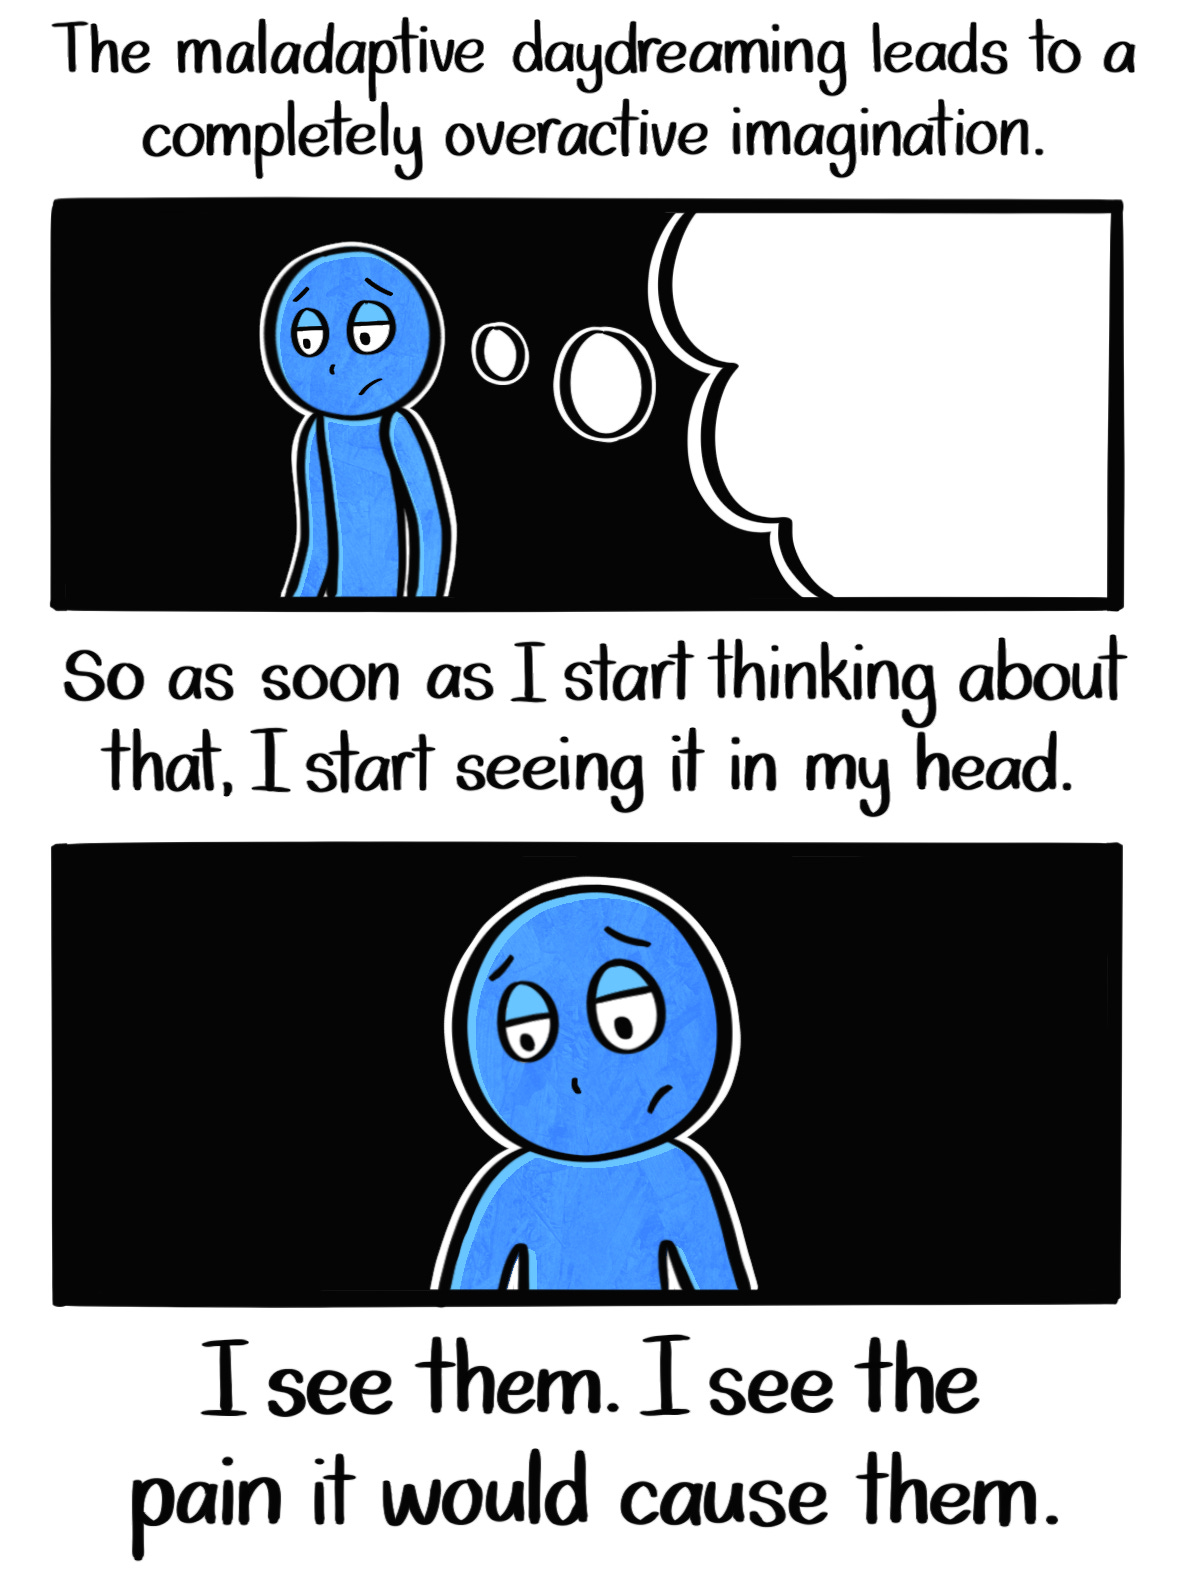 Caption: The maladaptive daydreaming leads to a completely overactive imagination. So as soon as I start thinking about that, I start seeing it in my head. I can see them. I can see the pain it would cause them. Image: Two panels, the first showing the Blue Person against a black background, looking down with a dream bubble. The second one shows the Blue Person more close up, without the dream bubble.